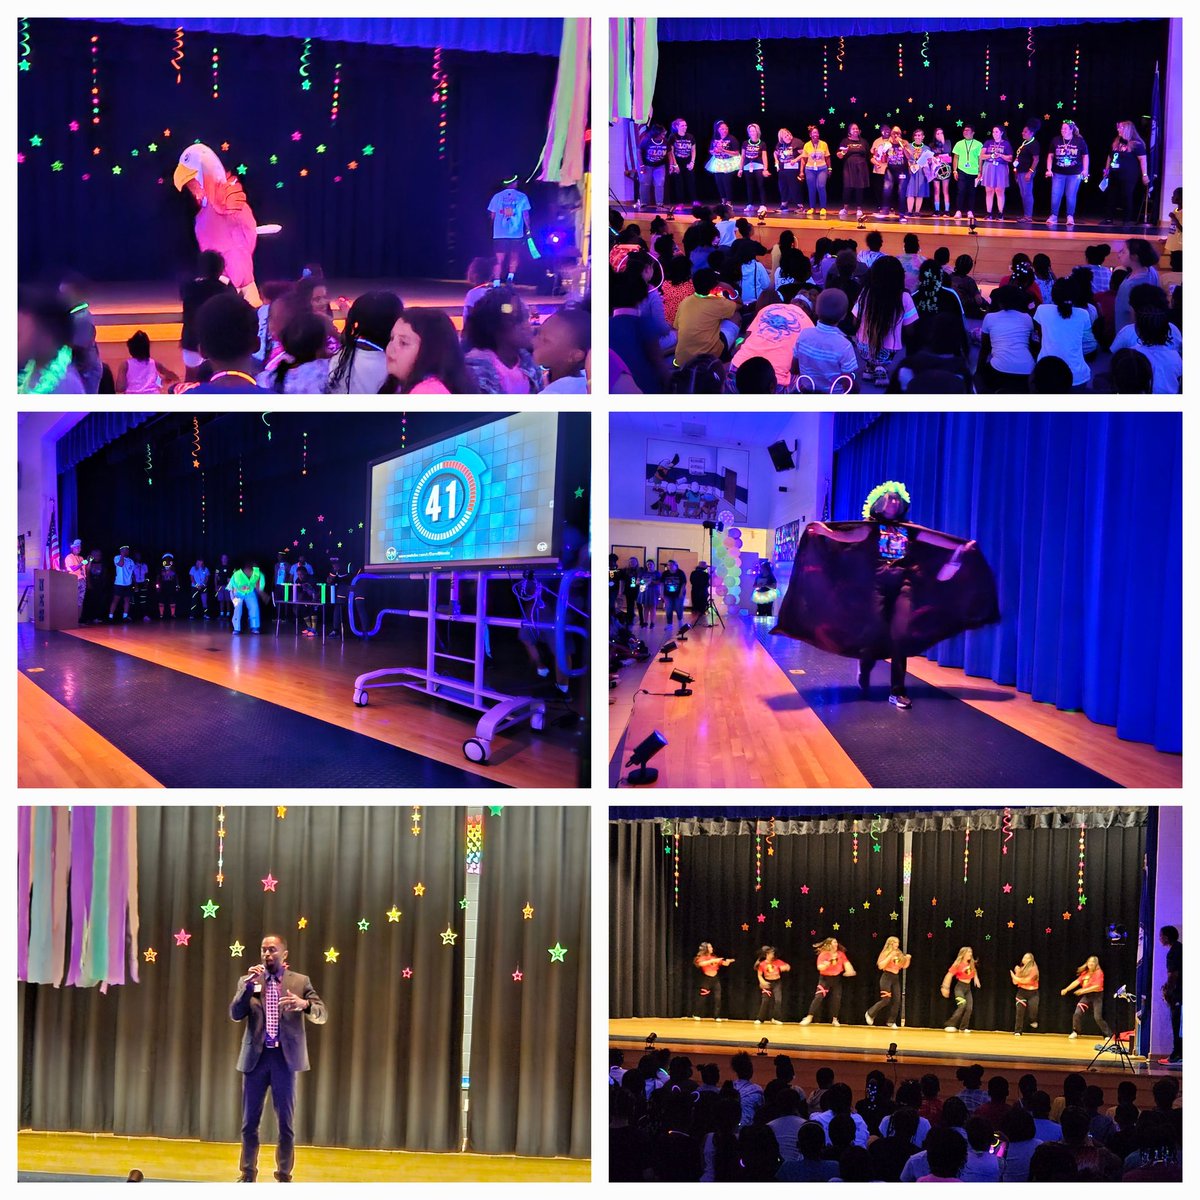 Newtown's SOL Pep Rally was so much fun! We had performances by the BHS drum line and dance team, a staff fashion show, minute to win it games, student performances, and a surprise visit from Mr. Lugo. Thank you, Mrs. Davis for putting this together for our students. @Newtown_E